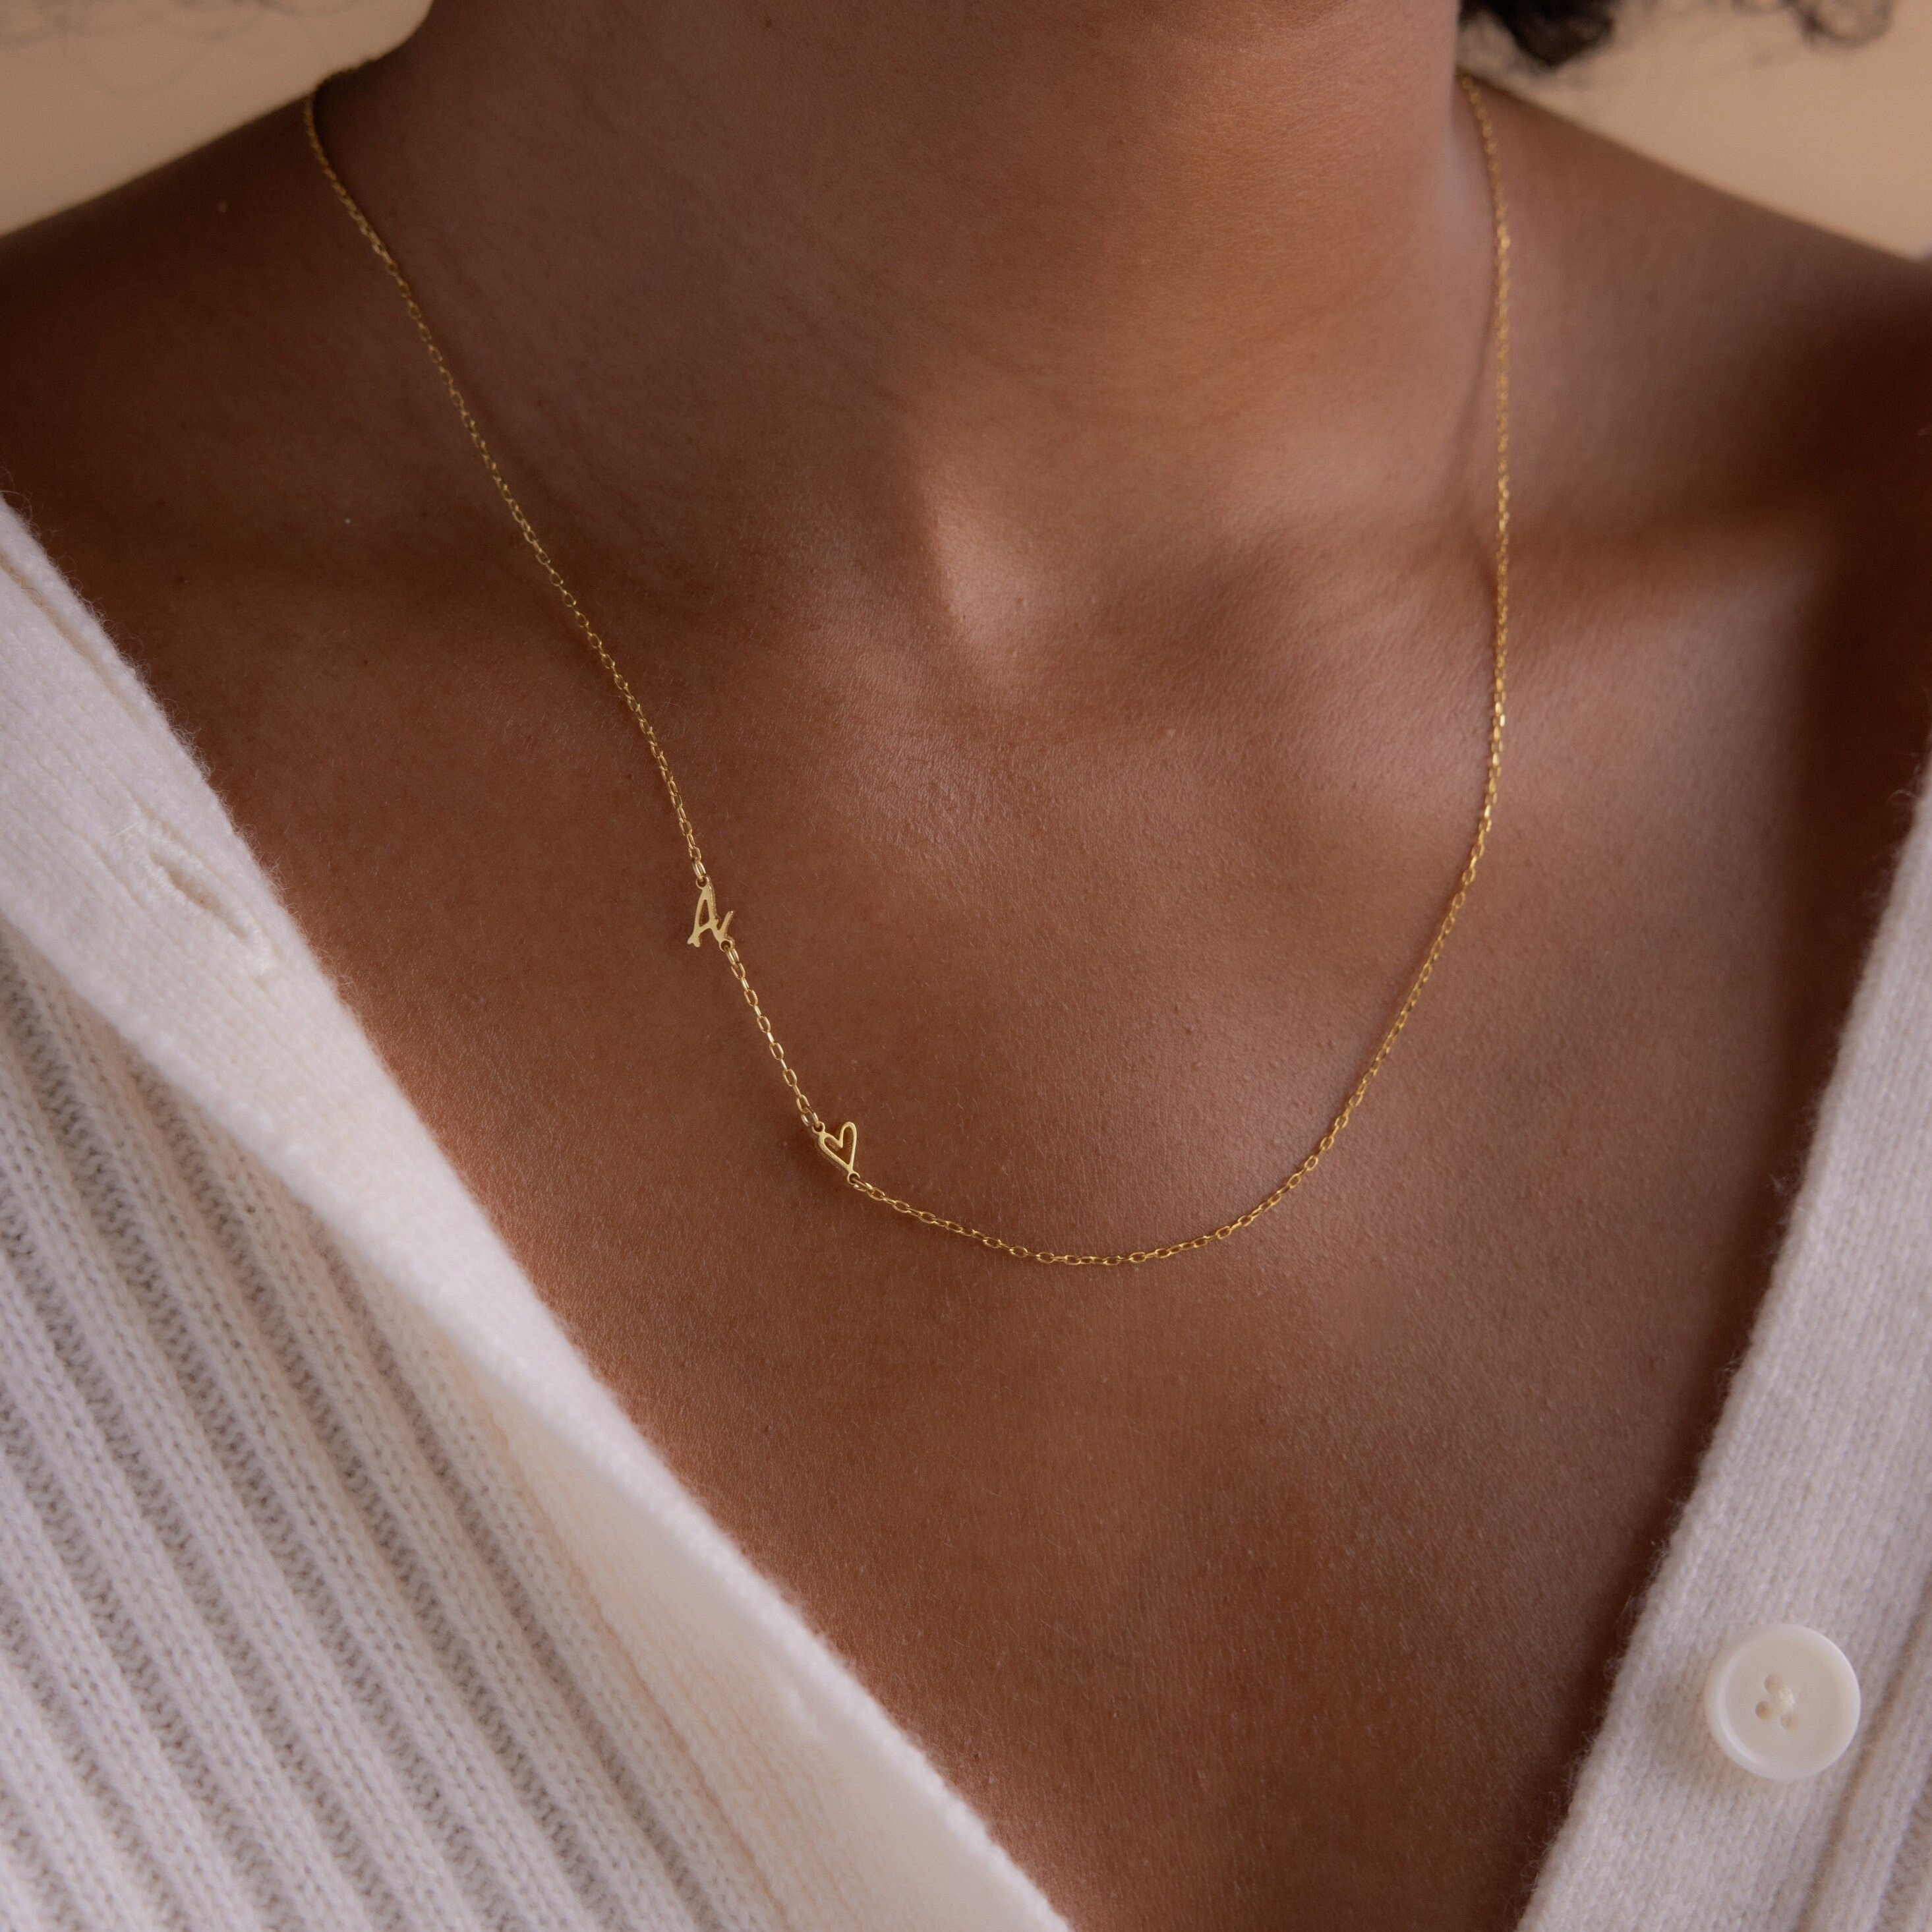 Cute 14KT Gold Necklace - Initial Necklace - 